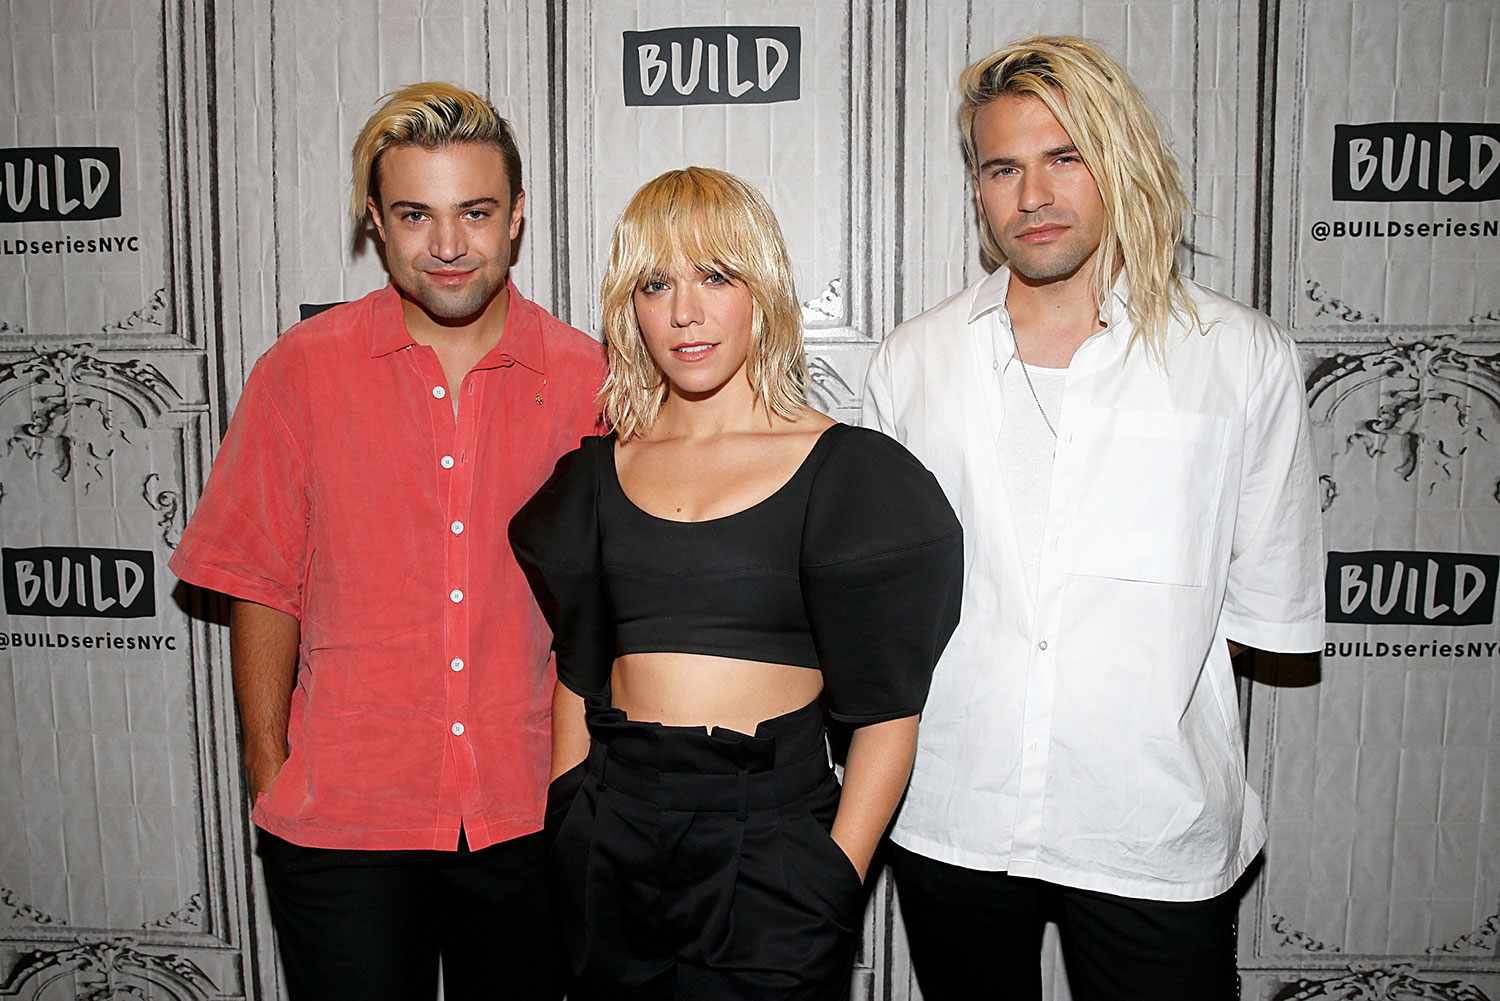 The Band Perry Announces Hiatus to Focus on Solo Creative Pursuits